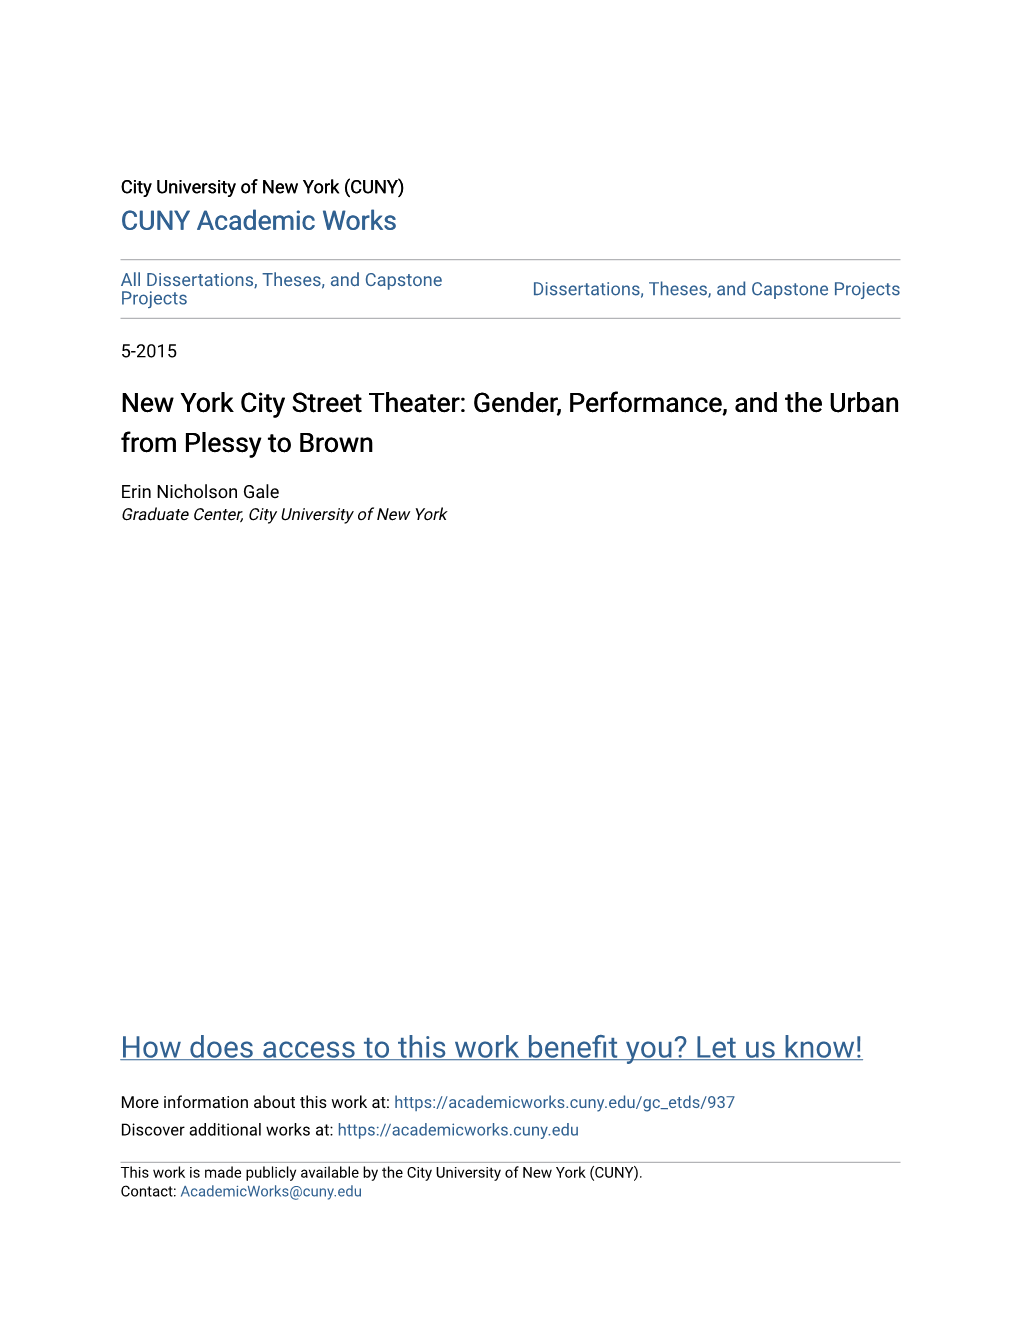 New York City Street Theater: Gender, Performance, and the Urban from Plessy to Brown